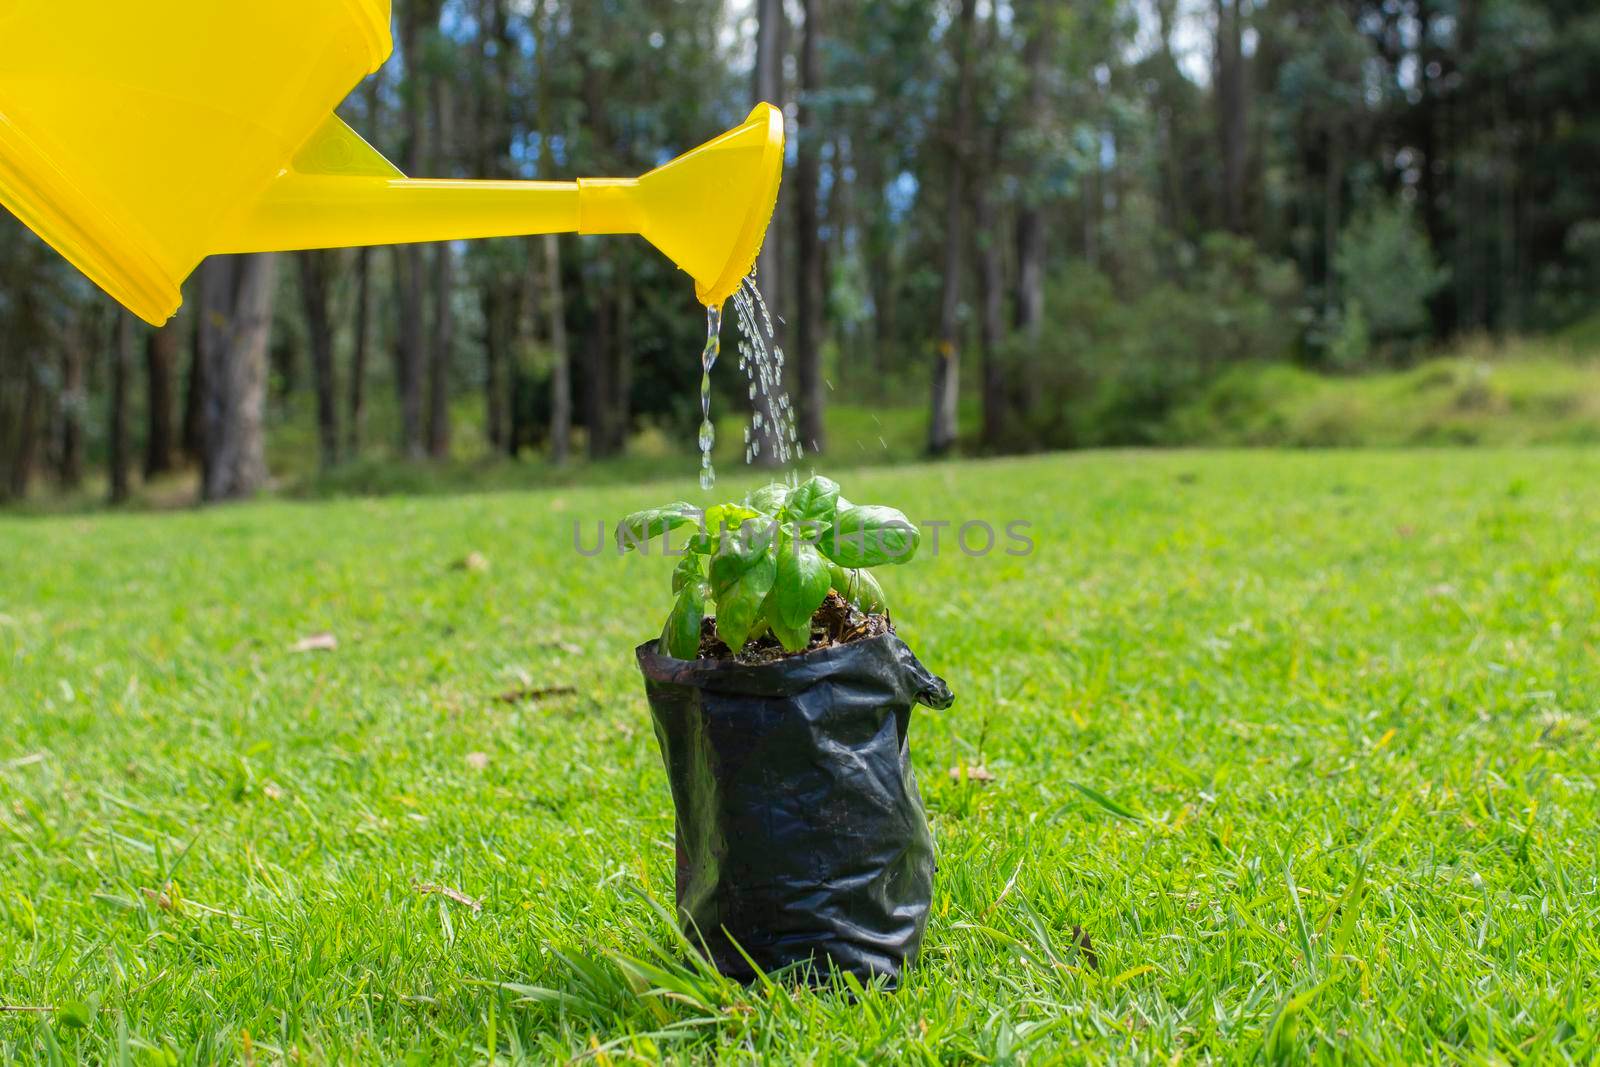 Yellow watering can watering a small plant inside a black plastic before being planted in a field surrounded by trees by alejomiranda